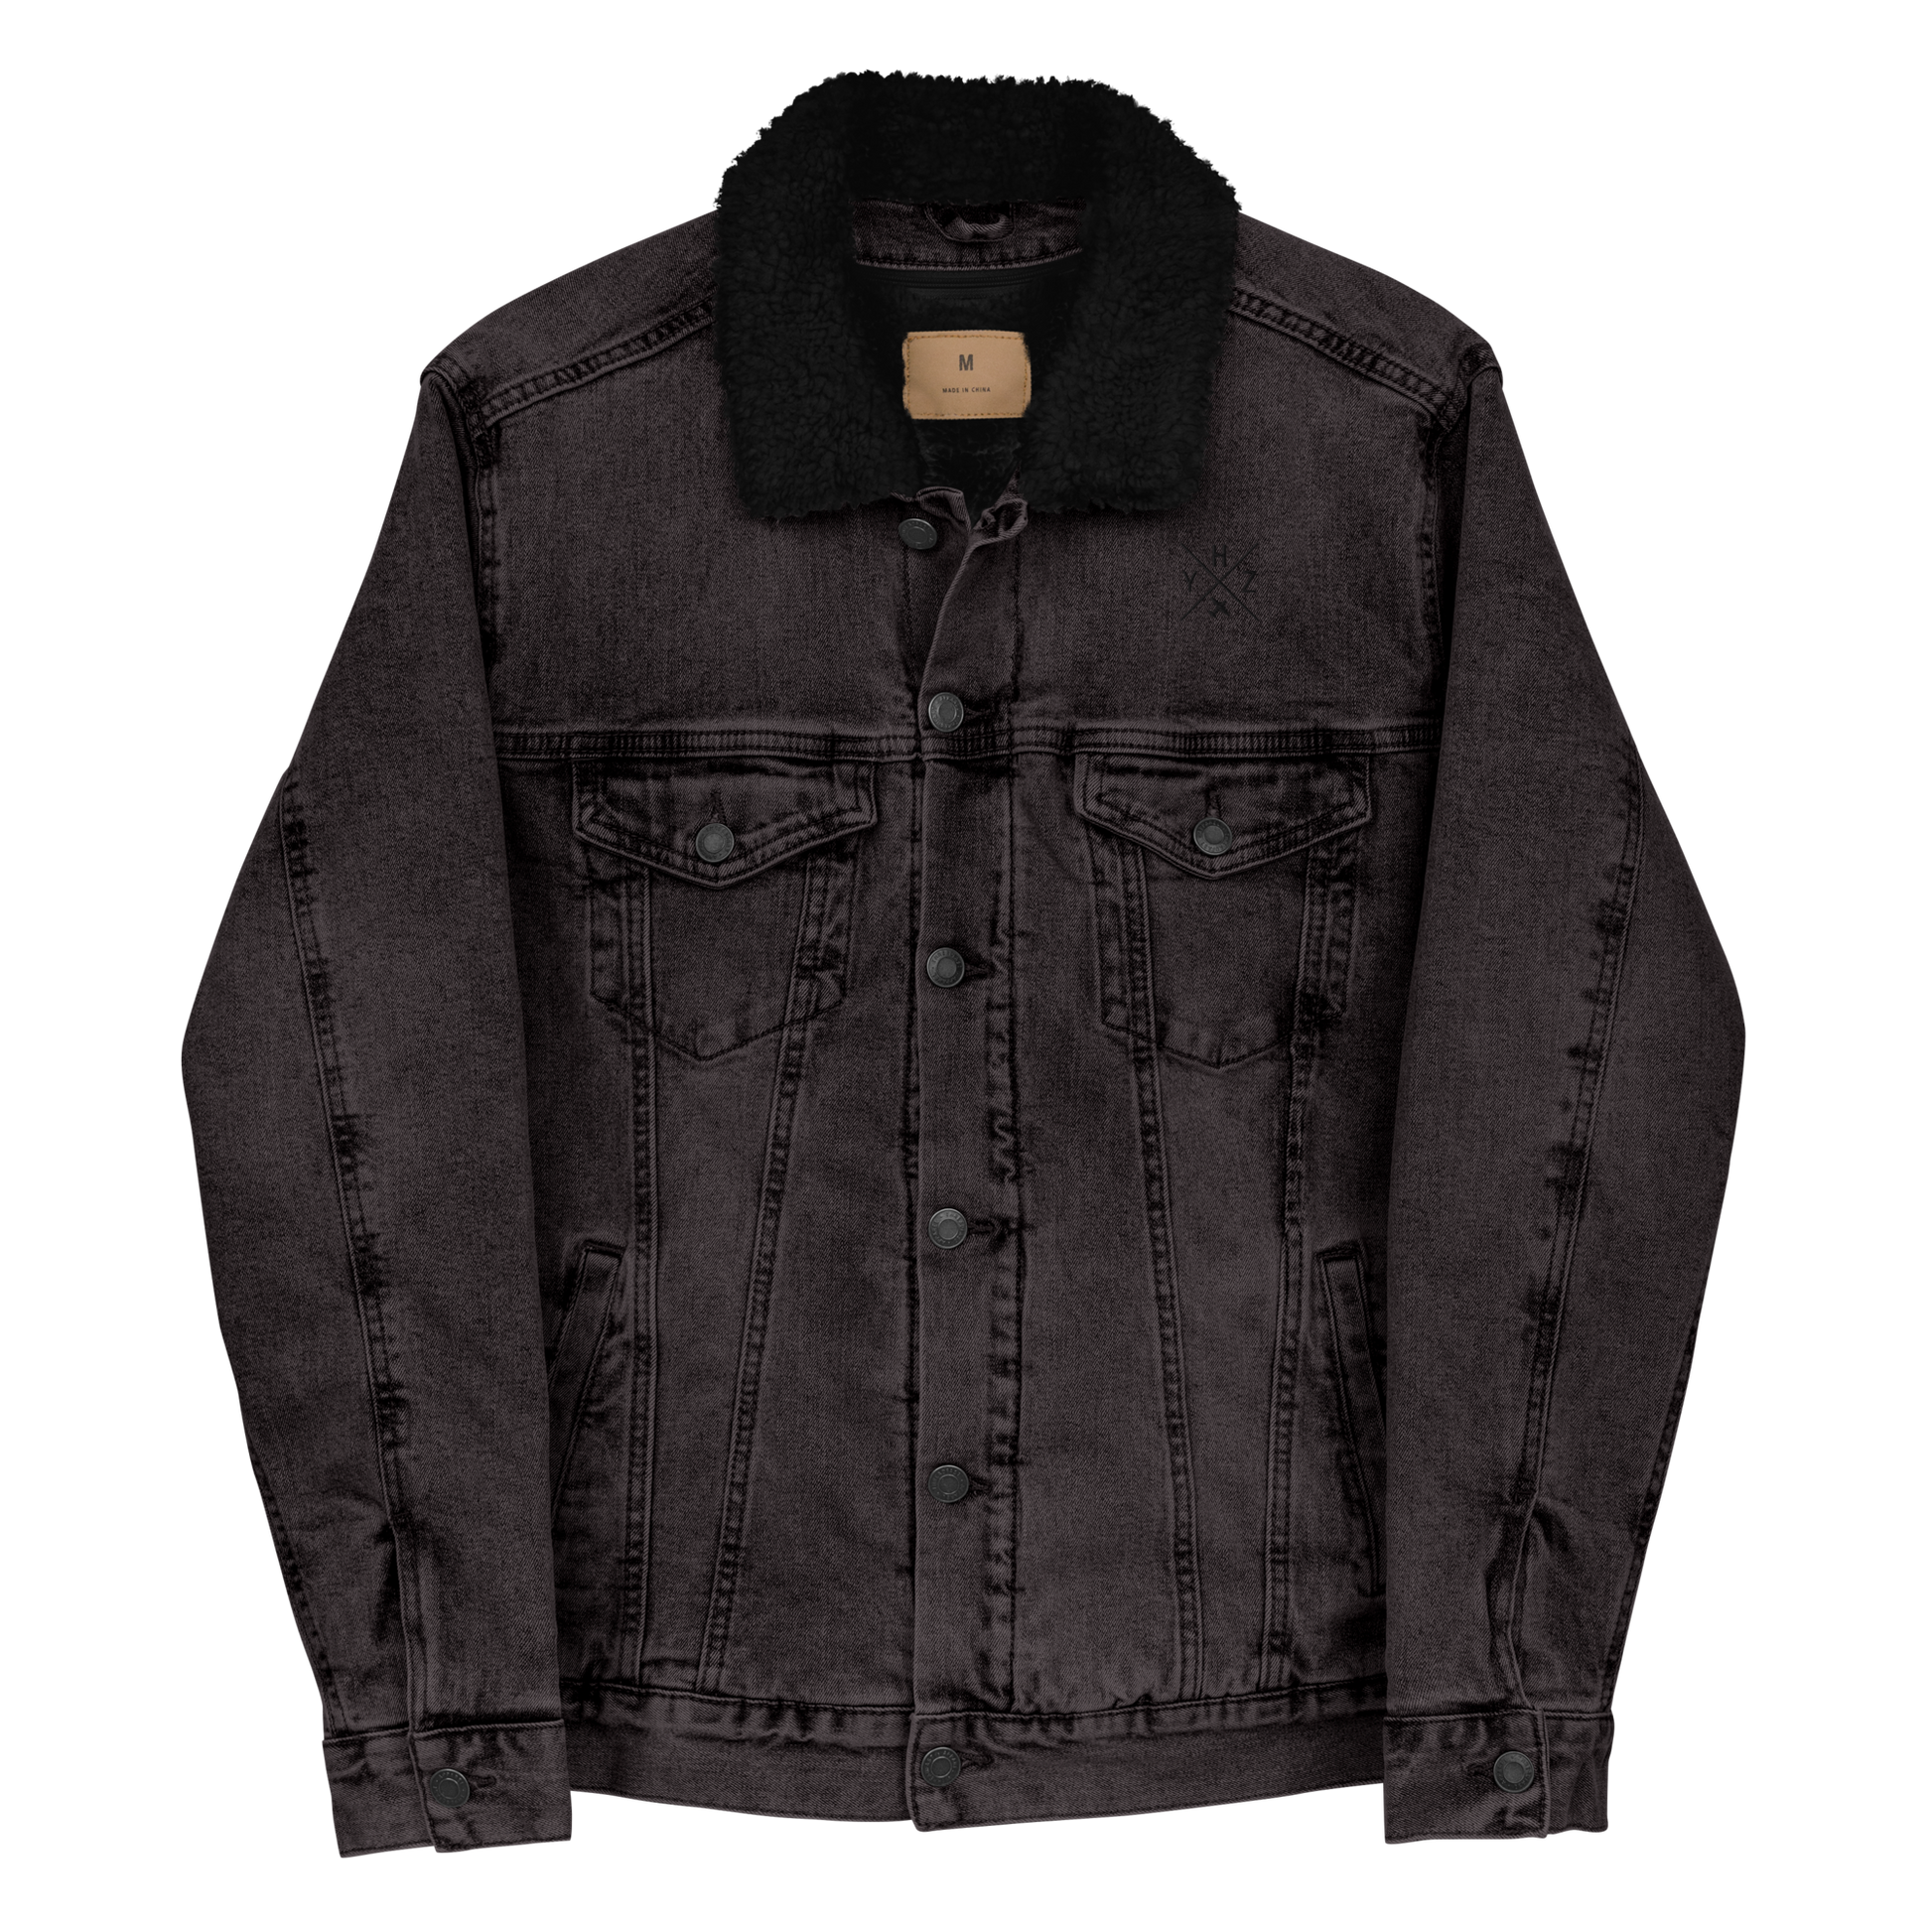 YHM Designs - YHZ Halifax Denim Sherpa Jacket - Crossed-X Design with Airport Code and Vintage Propliner - Black & White Embroidery - Image 06